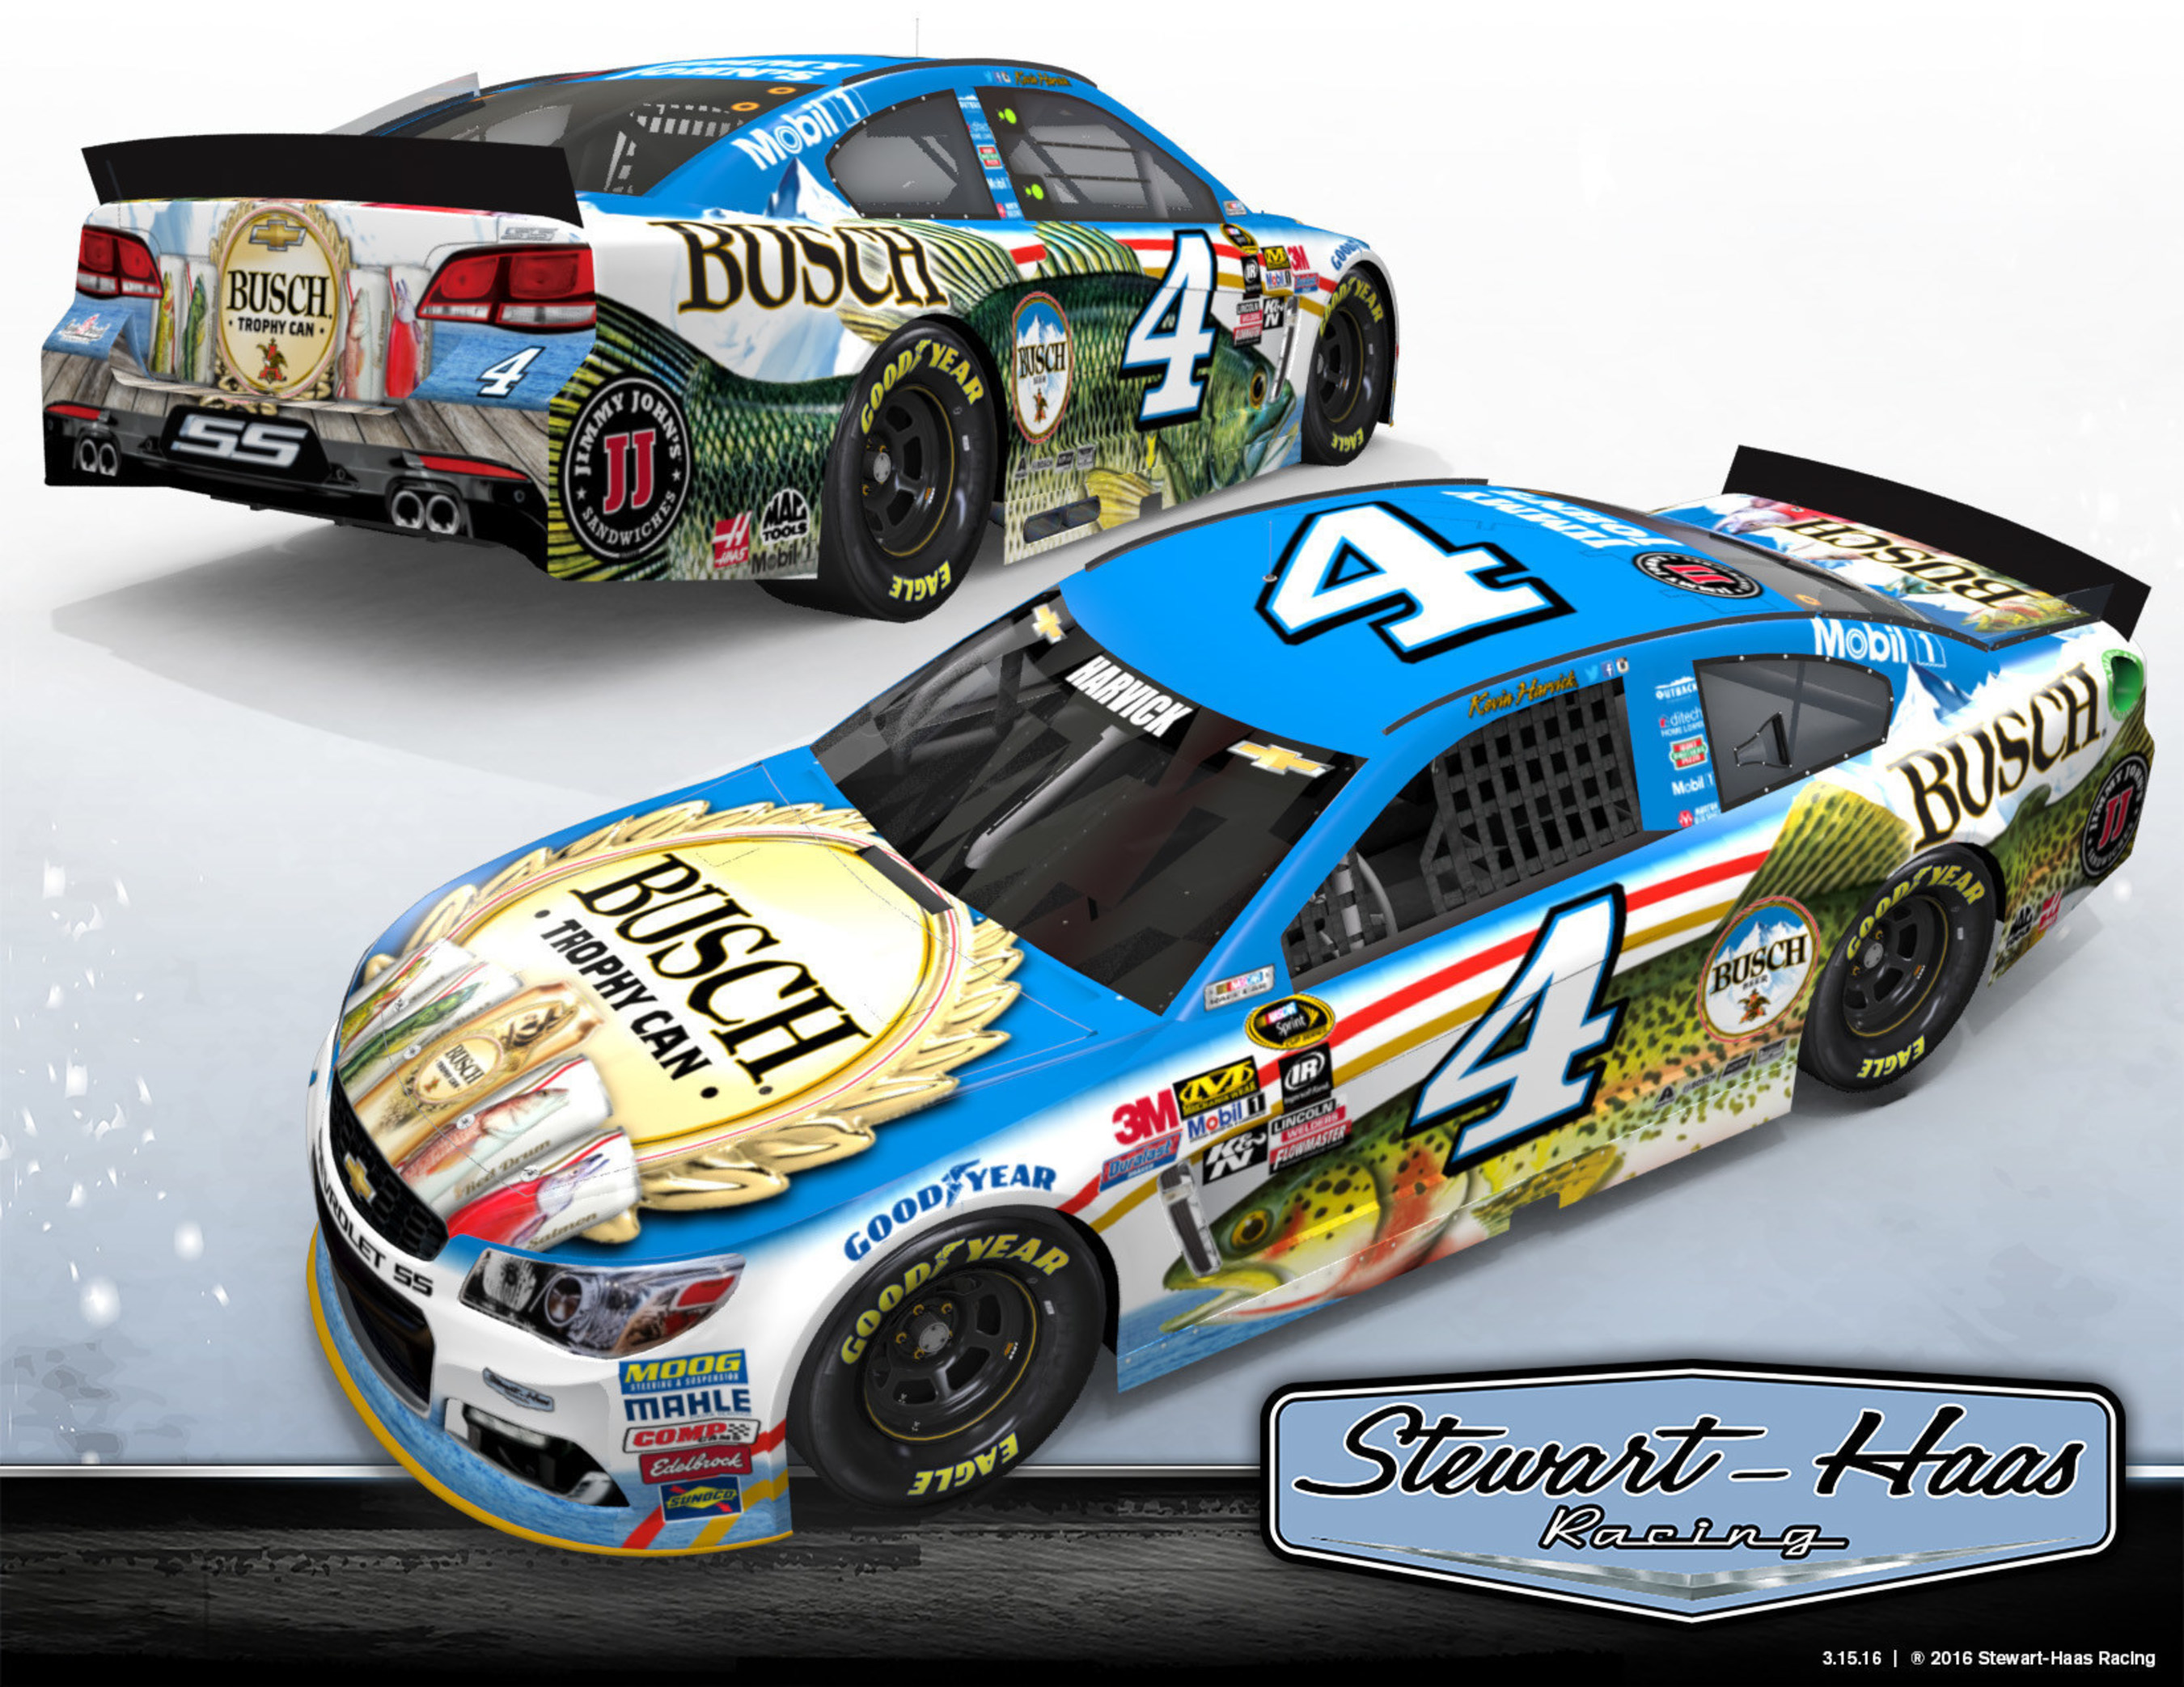 Busch beer's popular fishing promotion is back with a new twist, giving consumers the chance to win the ultimate fishing getaway with pro fisherman and seven time Angler of the Year, Kevin VanDam. The brand's 2016 campaign kicks off on May 1 when NASCAR driver Kevin Harvick's No. 4 Chevrolet SS for Stewart-Haas Racing (SHR) sports a special-edition Busch fishing paint scheme during the GEICO 500 Sprint Cup Series race at Talladega (Alabama) Superspeedway.